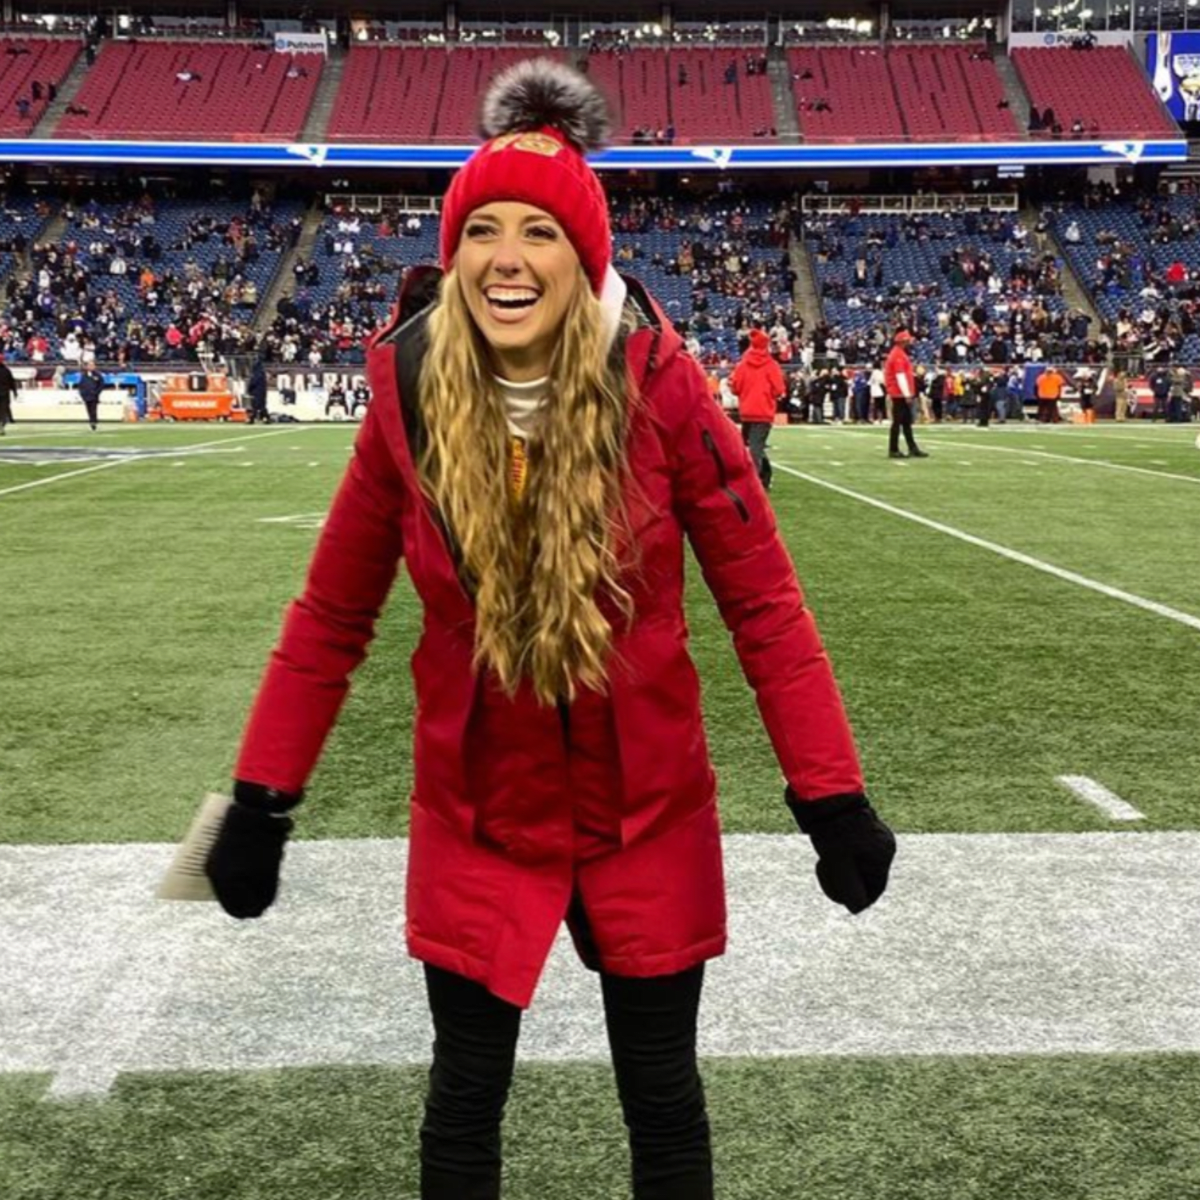 Patrick, Brittany Mahomes reveal gender of new baby